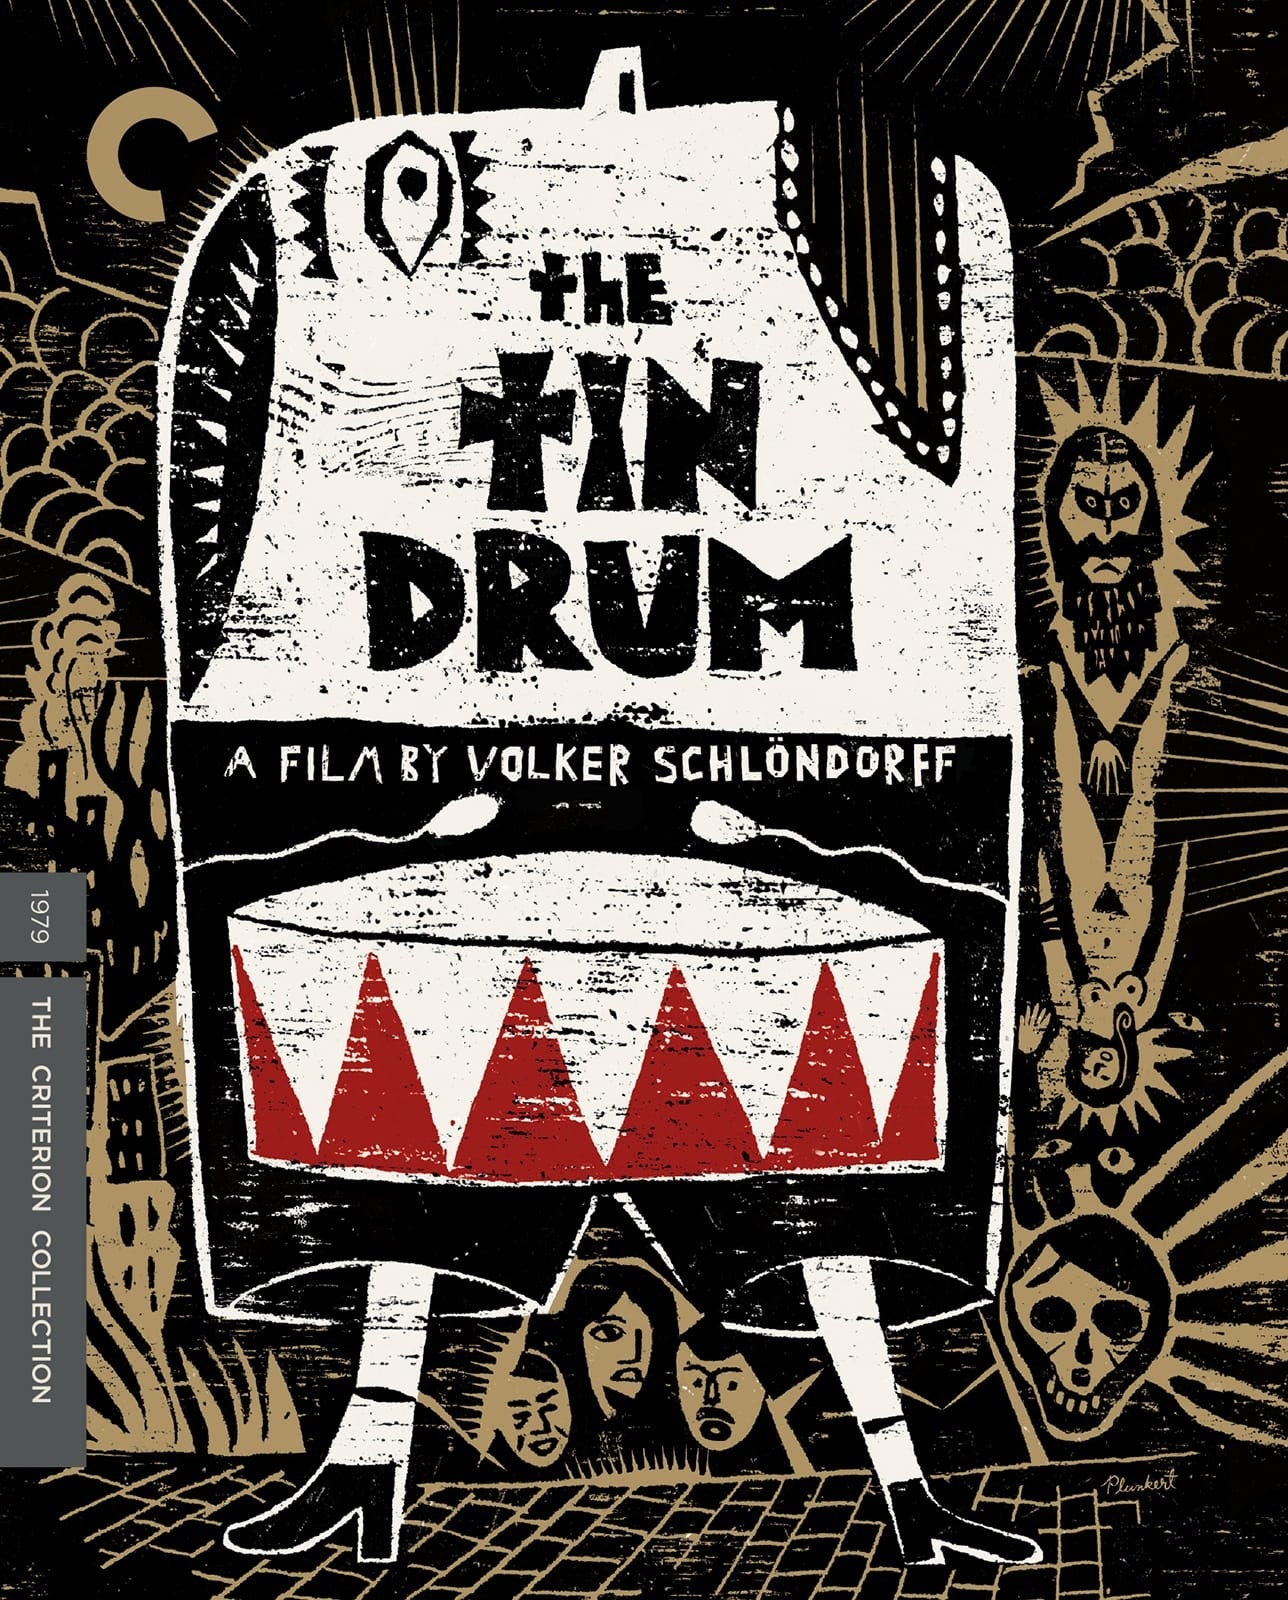 The Tin Drum - Criterion Collection (Blu-ray)